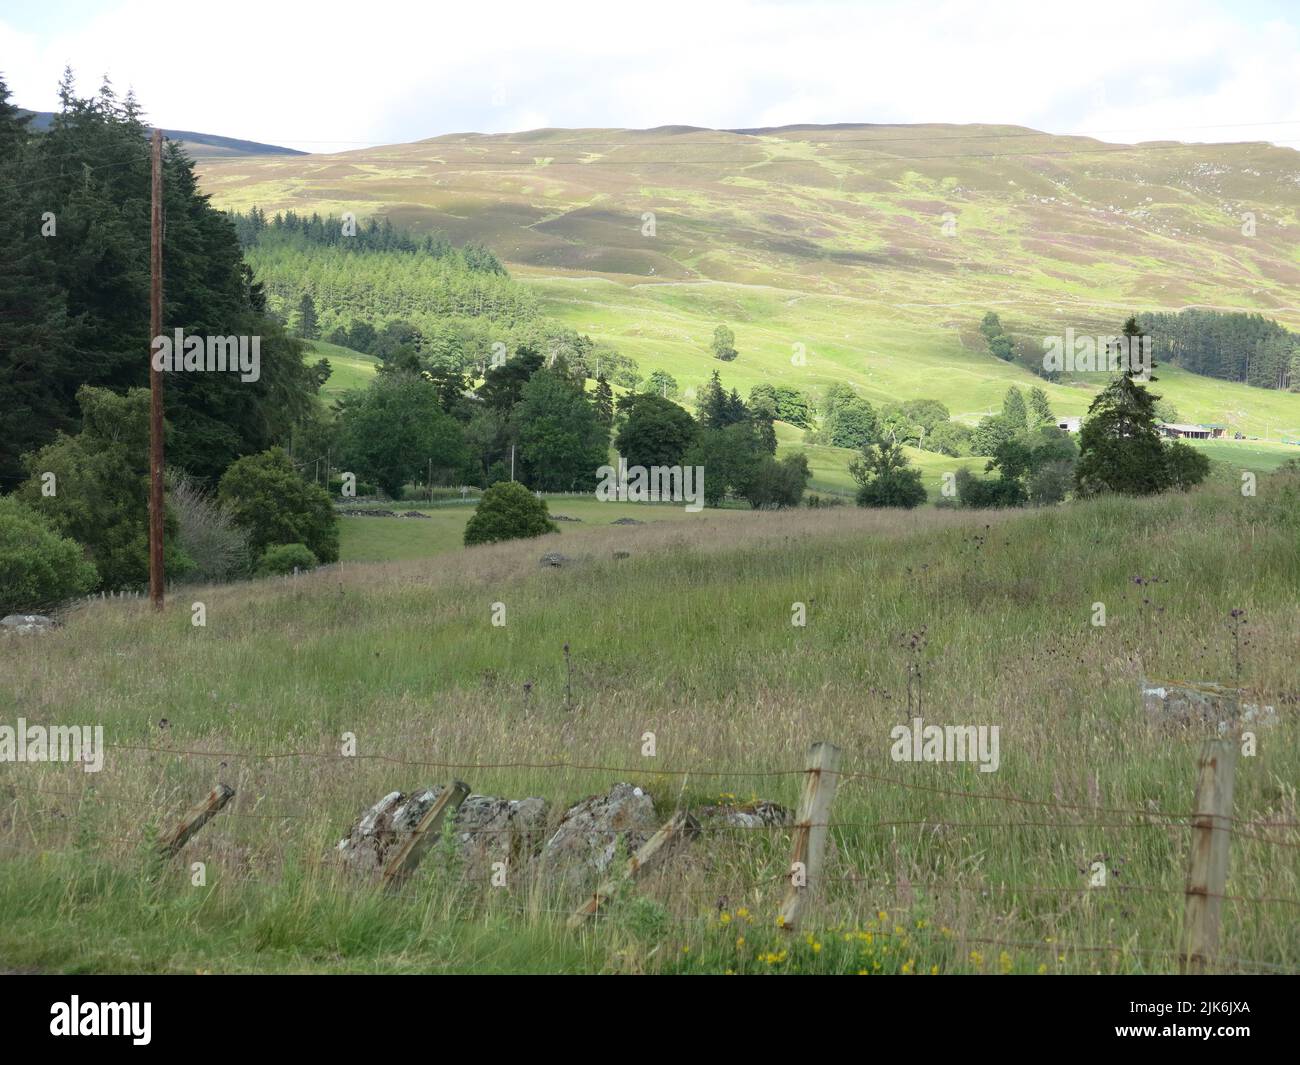 The gentle Highlands scenery of the glens of Strathardle in central Perthshire: take a road trip along the A924 between Blairgowrie and Pitlochry. Stock Photo